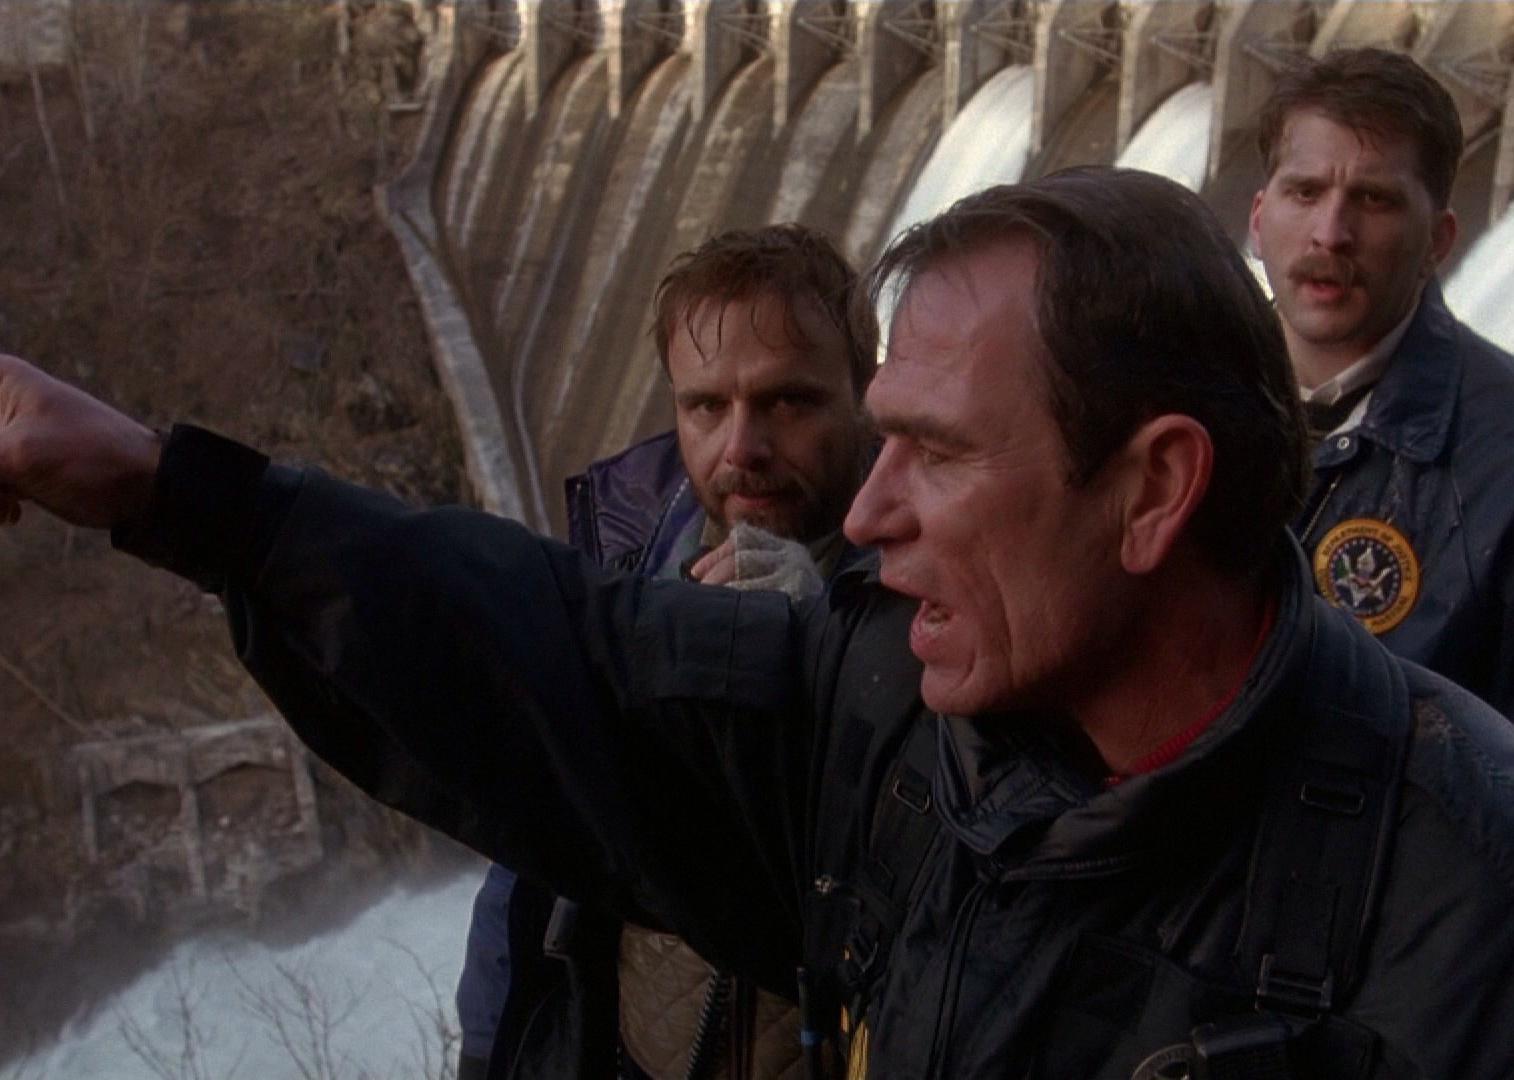 Tommy Lee Jones points at something at the bottom of a dam with Joe Pantoliano and Daniel Roebuck as police officers in the background.